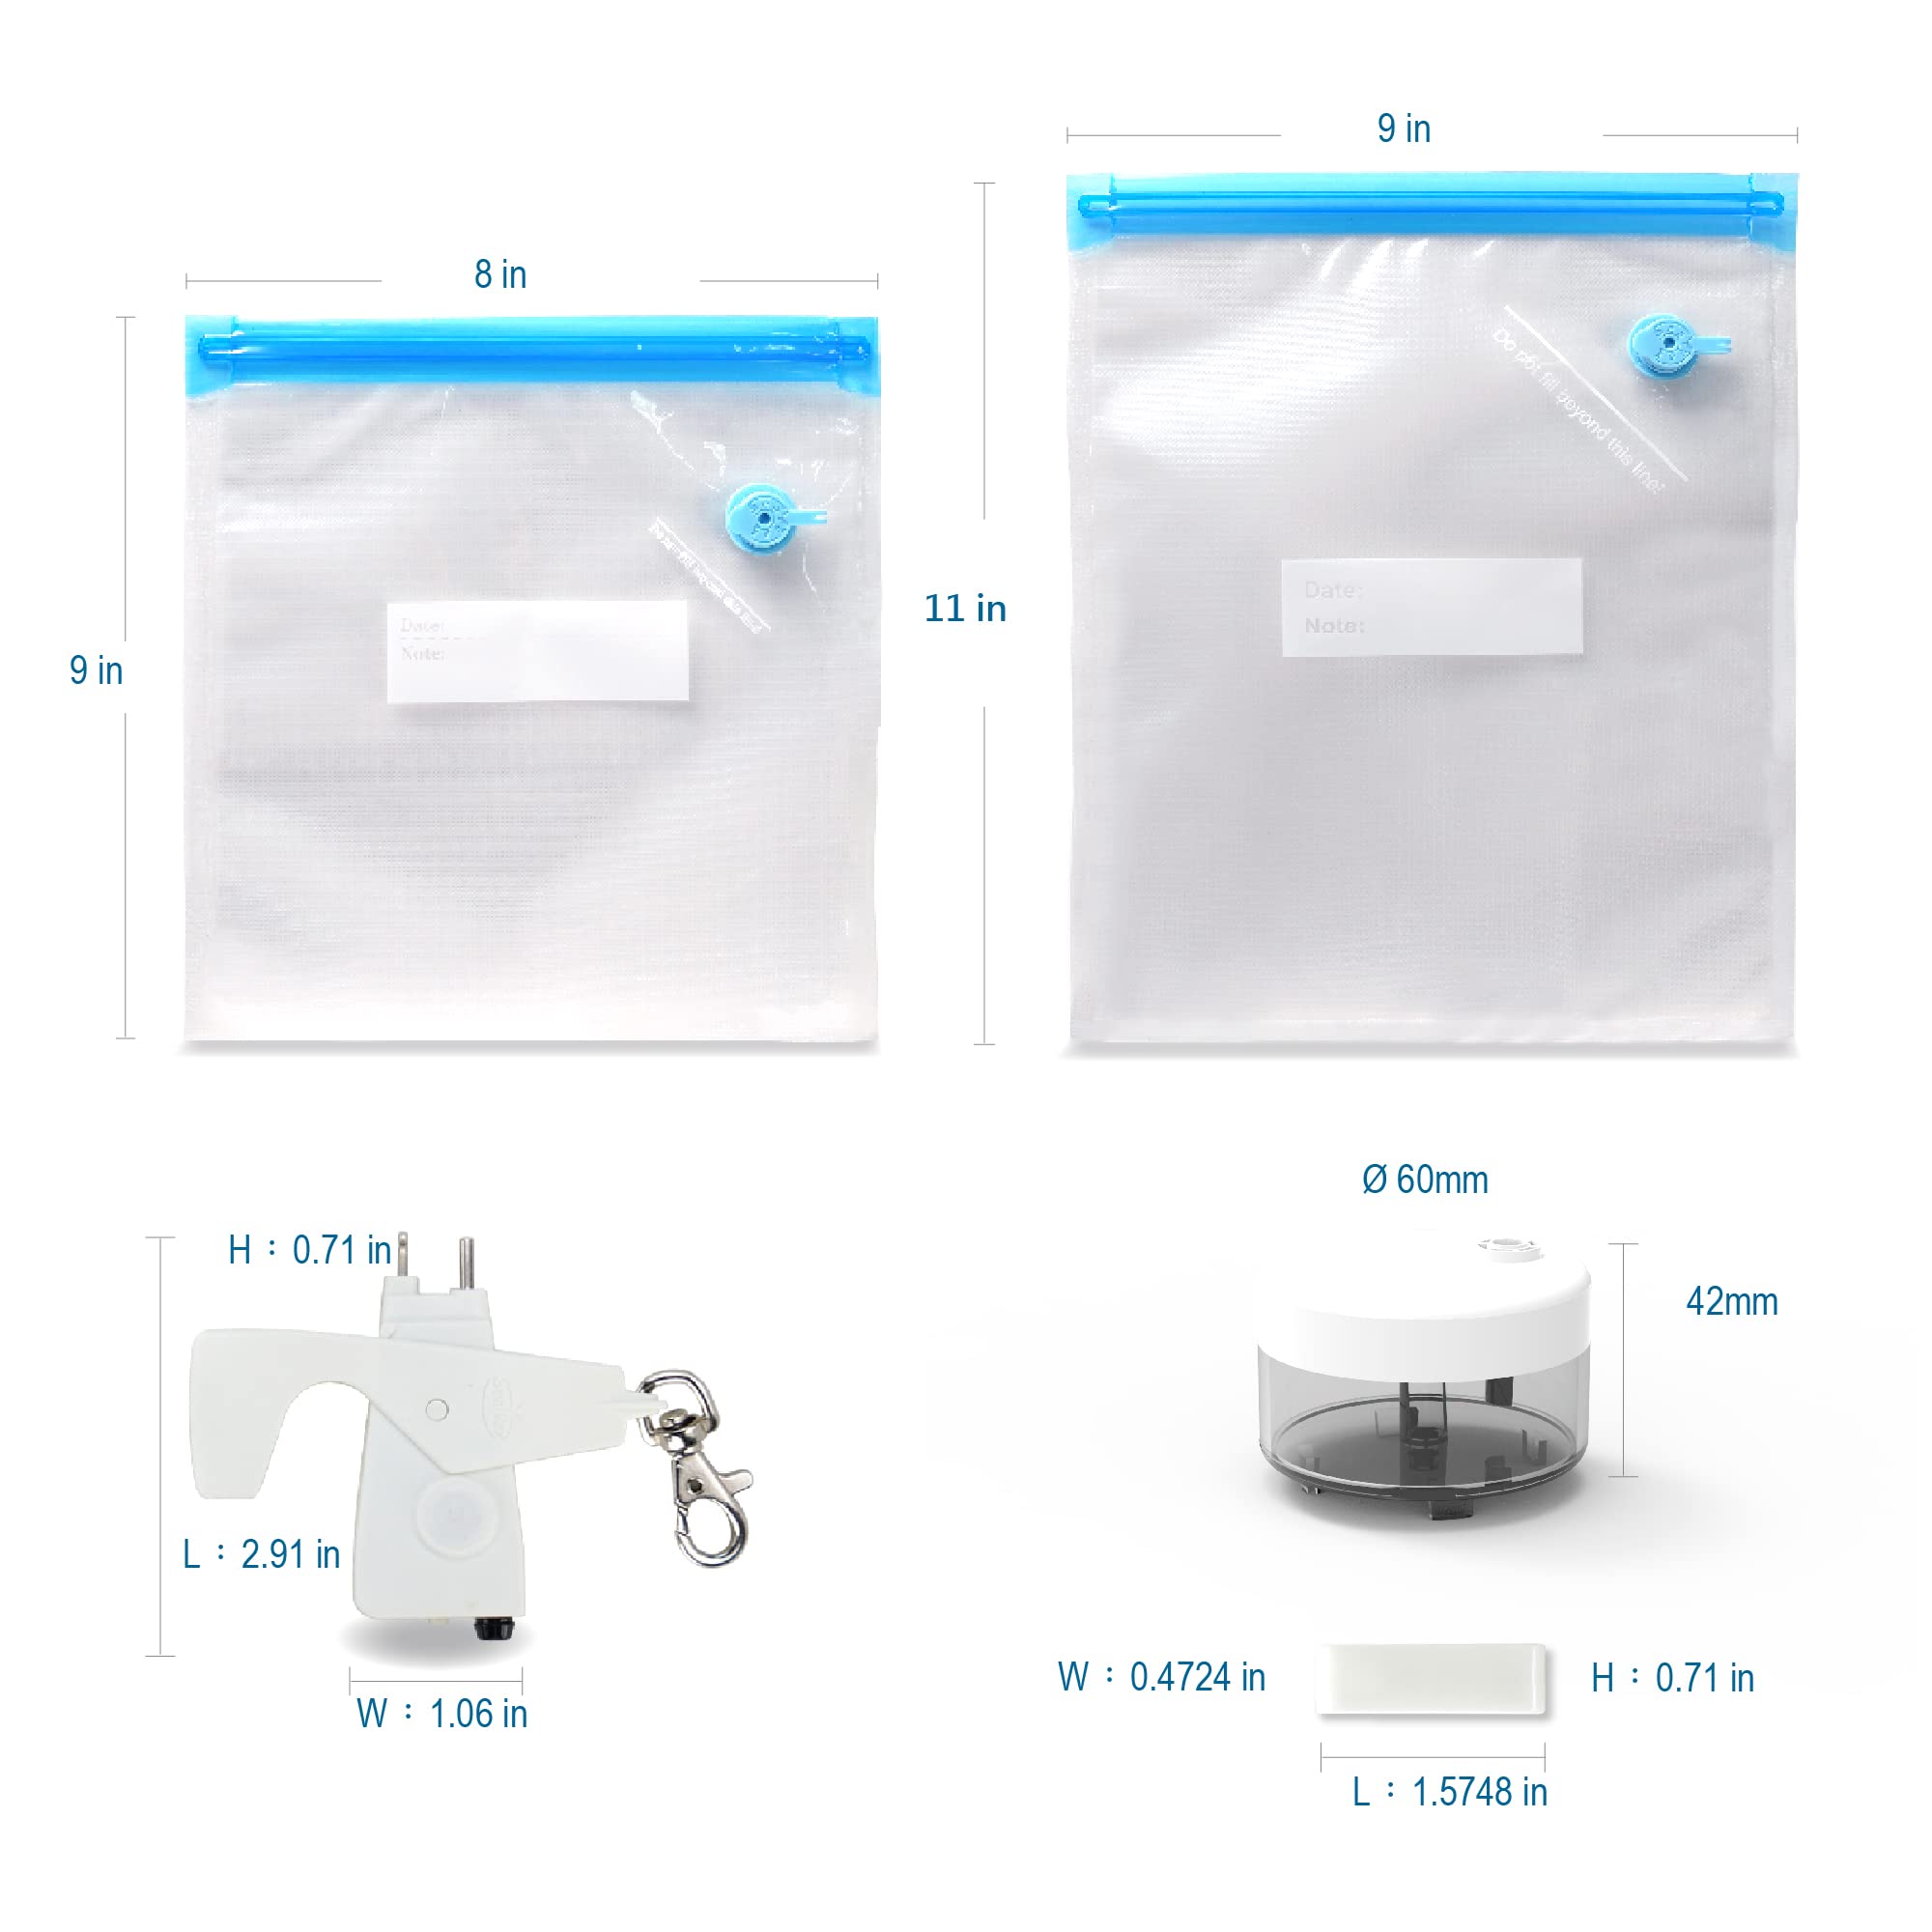 Sous-vide Bags, airtight and reusable freezer bags, BPA-free. Medium size (9" x 11") and include 20 generic vacuum sealer bags compatible with most sous vide pumps and machines.